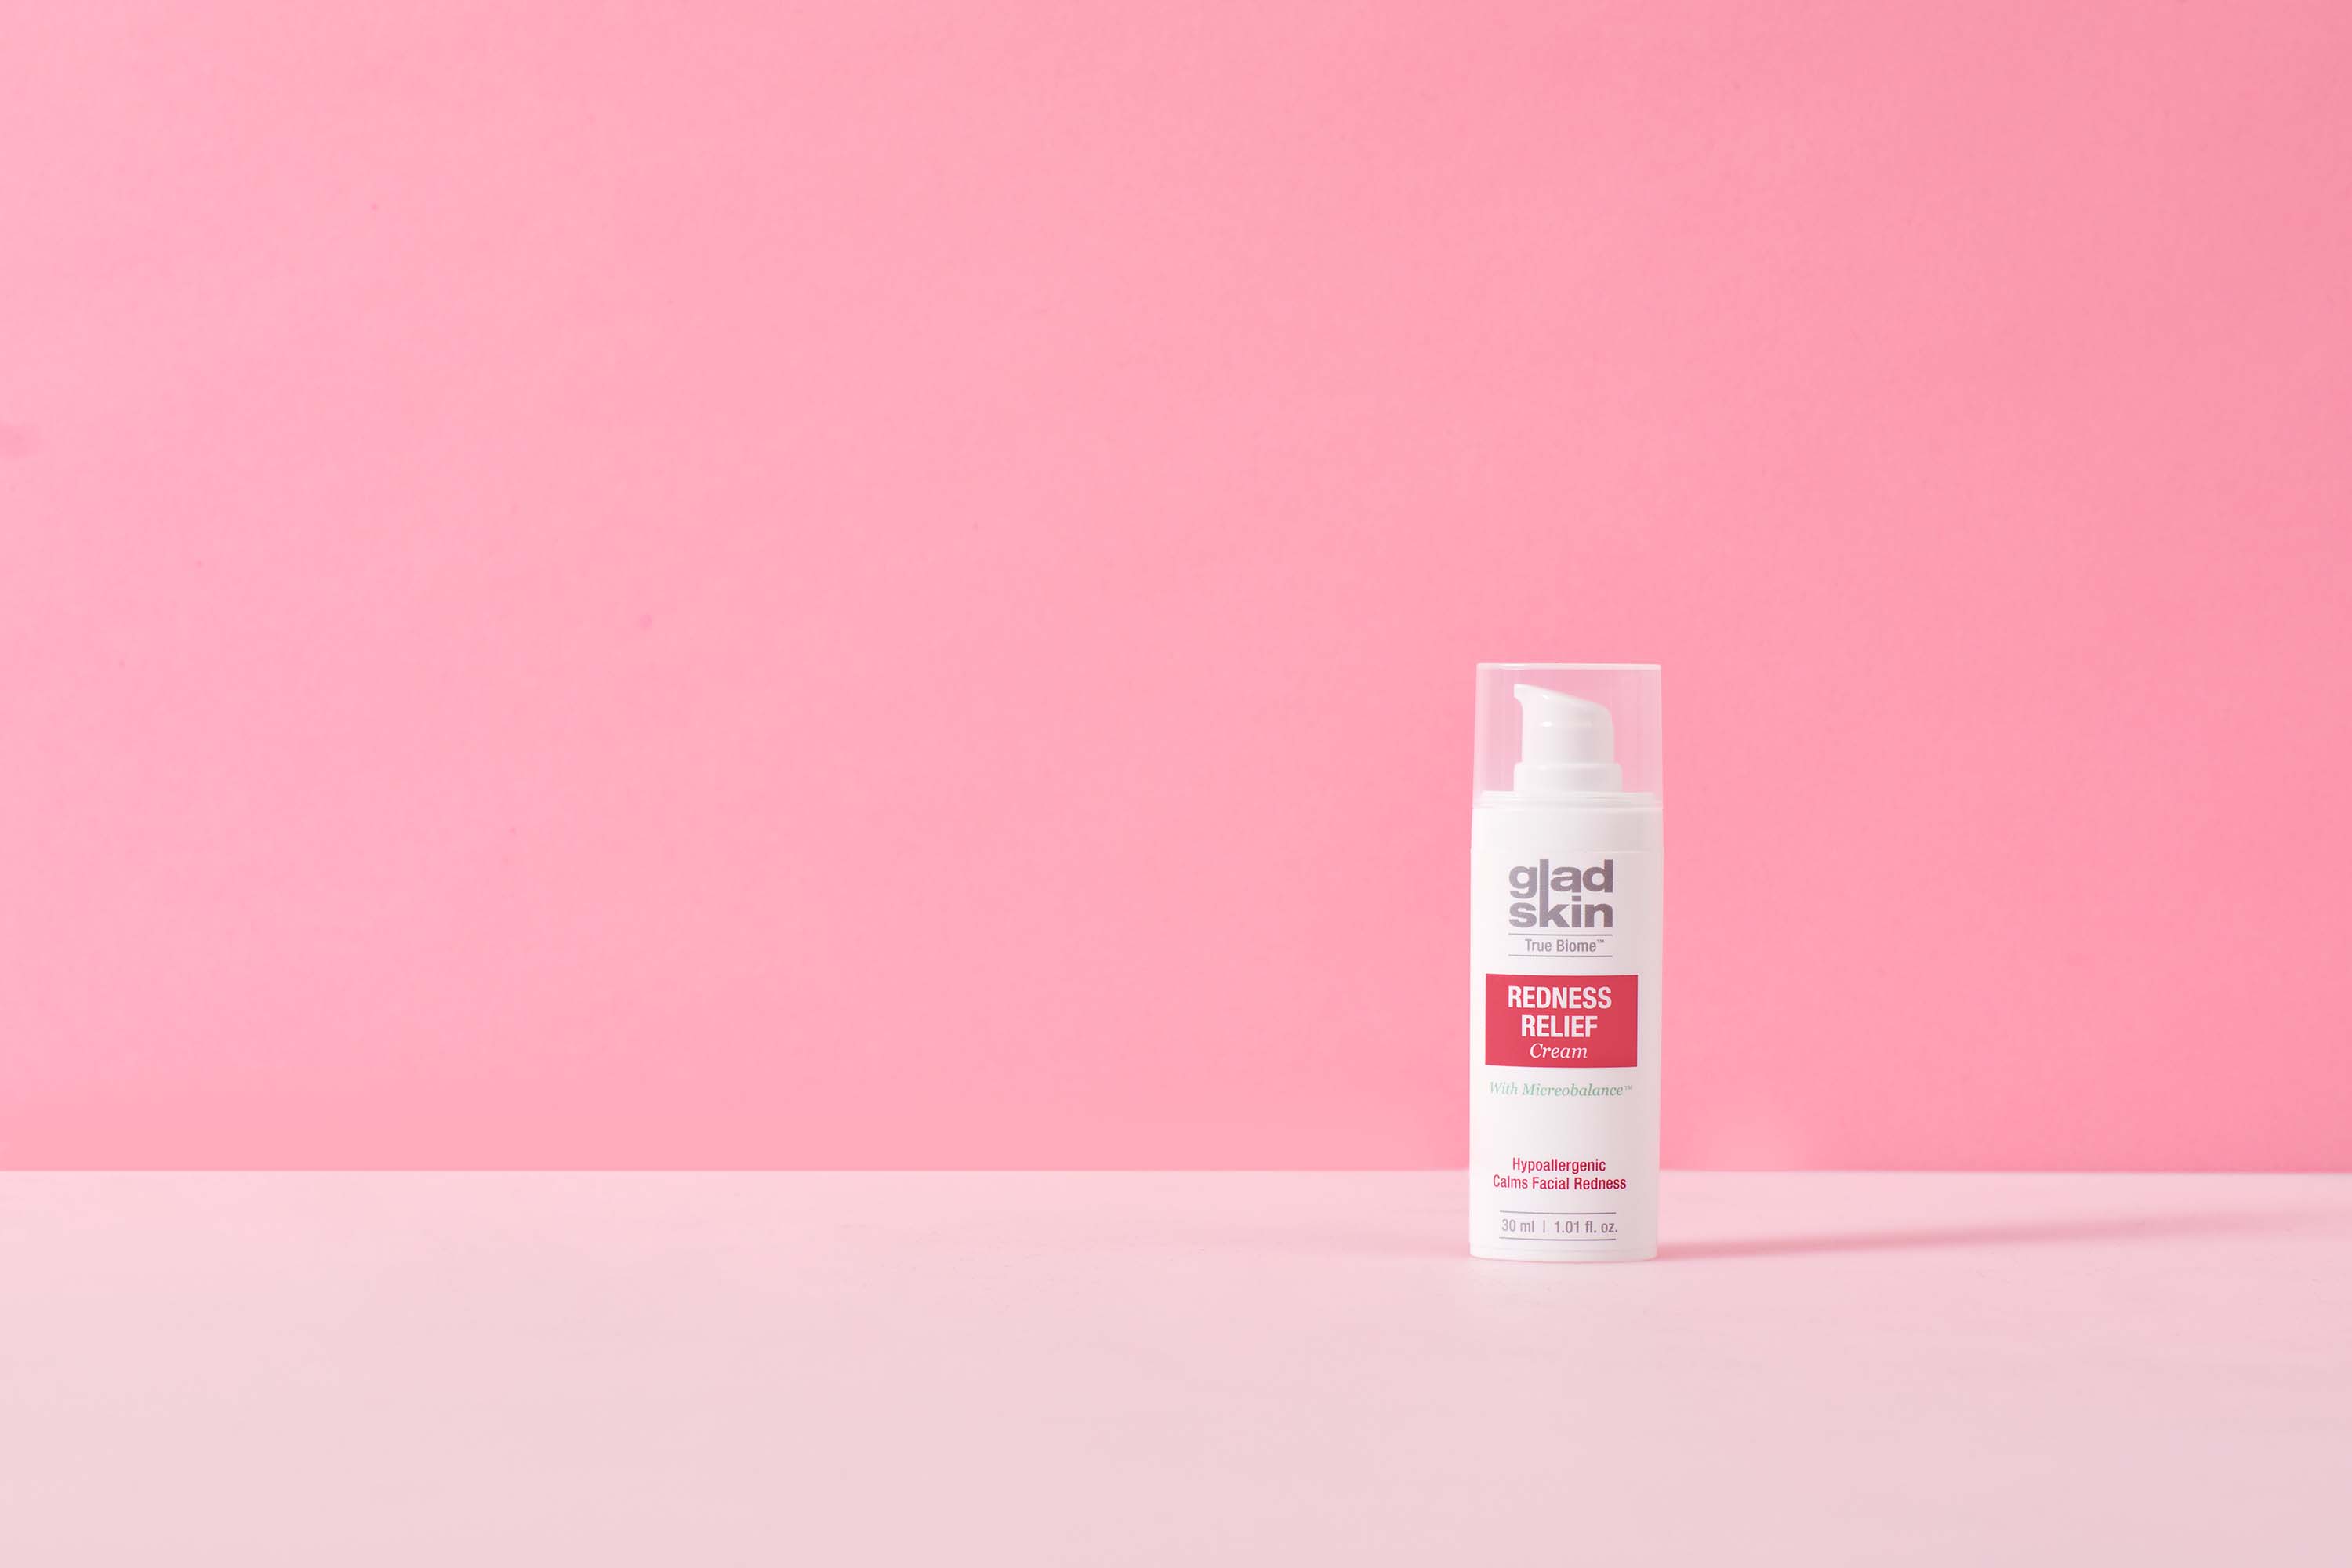 Gladskin Skincare Launches Redness Relief Cream for the Treatment of Rosacea